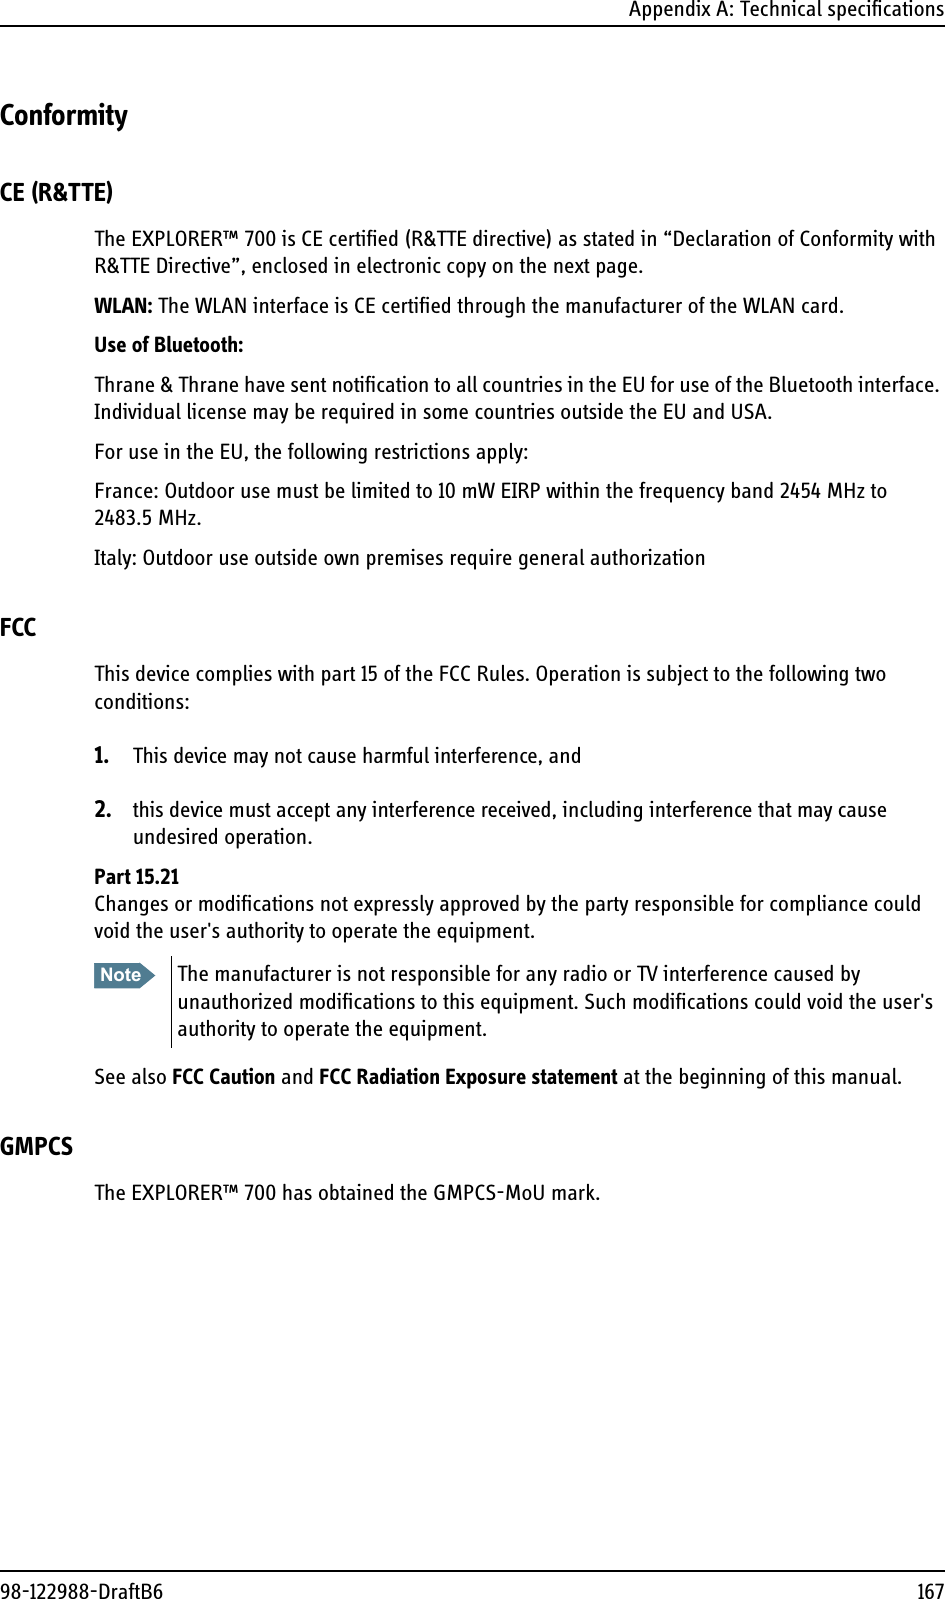 Appendix A: Technical specifications98-122988-DraftB6 167ConformityCE (R&amp;TTE)The EXPLORER™ 700 is CE certified (R&amp;TTE directive) as stated in “Declaration of Conformity with R&amp;TTE Directive”, enclosed in electronic copy on the next page.WLAN: The WLAN interface is CE certified through the manufacturer of the WLAN card.Use of Bluetooth:Thrane &amp; Thrane have sent notification to all countries in the EU for use of the Bluetooth interface. Individual license may be required in some countries outside the EU and USA.For use in the EU, the following restrictions apply:France: Outdoor use must be limited to 10 mW EIRP within the frequency band 2454 MHz to 2483.5 MHz.Italy: Outdoor use outside own premises require general authorizationFCCThis device complies with part 15 of the FCC Rules. Operation is subject to the following two conditions:1. This device may not cause harmful interference, and 2. this device must accept any interference received, including interference that may cause undesired operation.Part 15.21Changes or modifications not expressly approved by the party responsible for compliance could void the user&apos;s authority to operate the equipment.See also FCC Caution and FCC Radiation Exposure statement at the beginning of this manual.GMPCSThe EXPLORER™ 700 has obtained the GMPCS-MoU mark.Note The manufacturer is not responsible for any radio or TV interference caused by unauthorized modifications to this equipment. Such modifications could void the user&apos;s authority to operate the equipment.